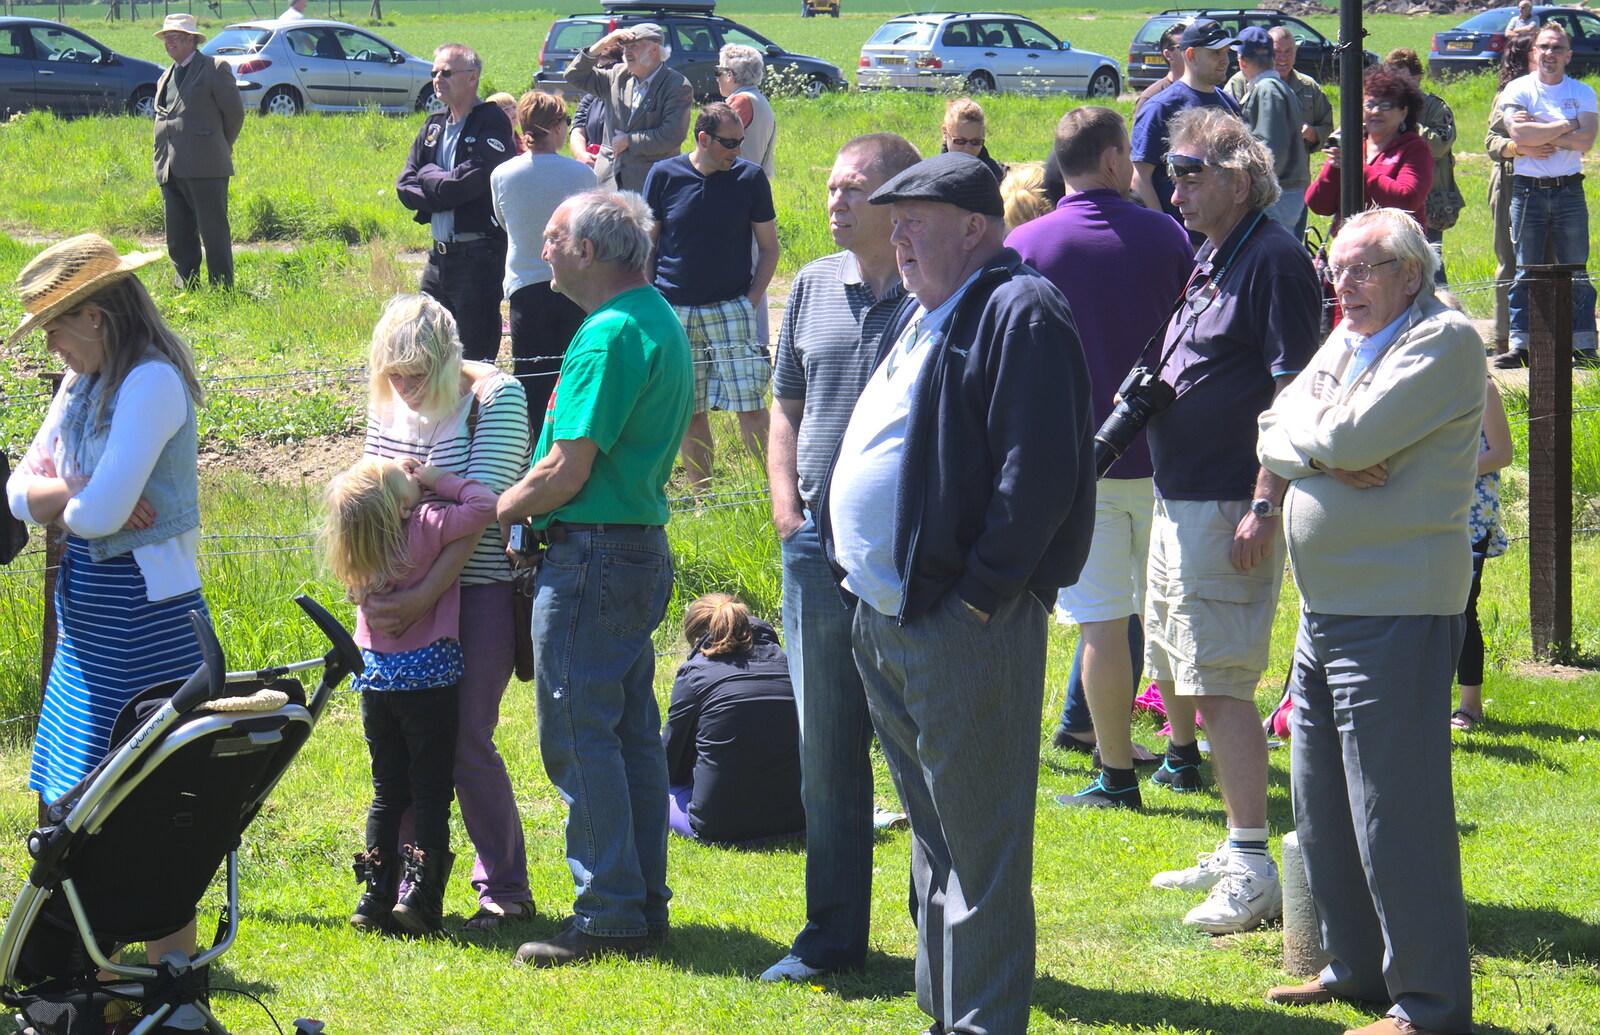 The crowds mill around from A "Sally B" B-17 Flypast, Thorpe Abbots, Norfolk - 27th May 2013